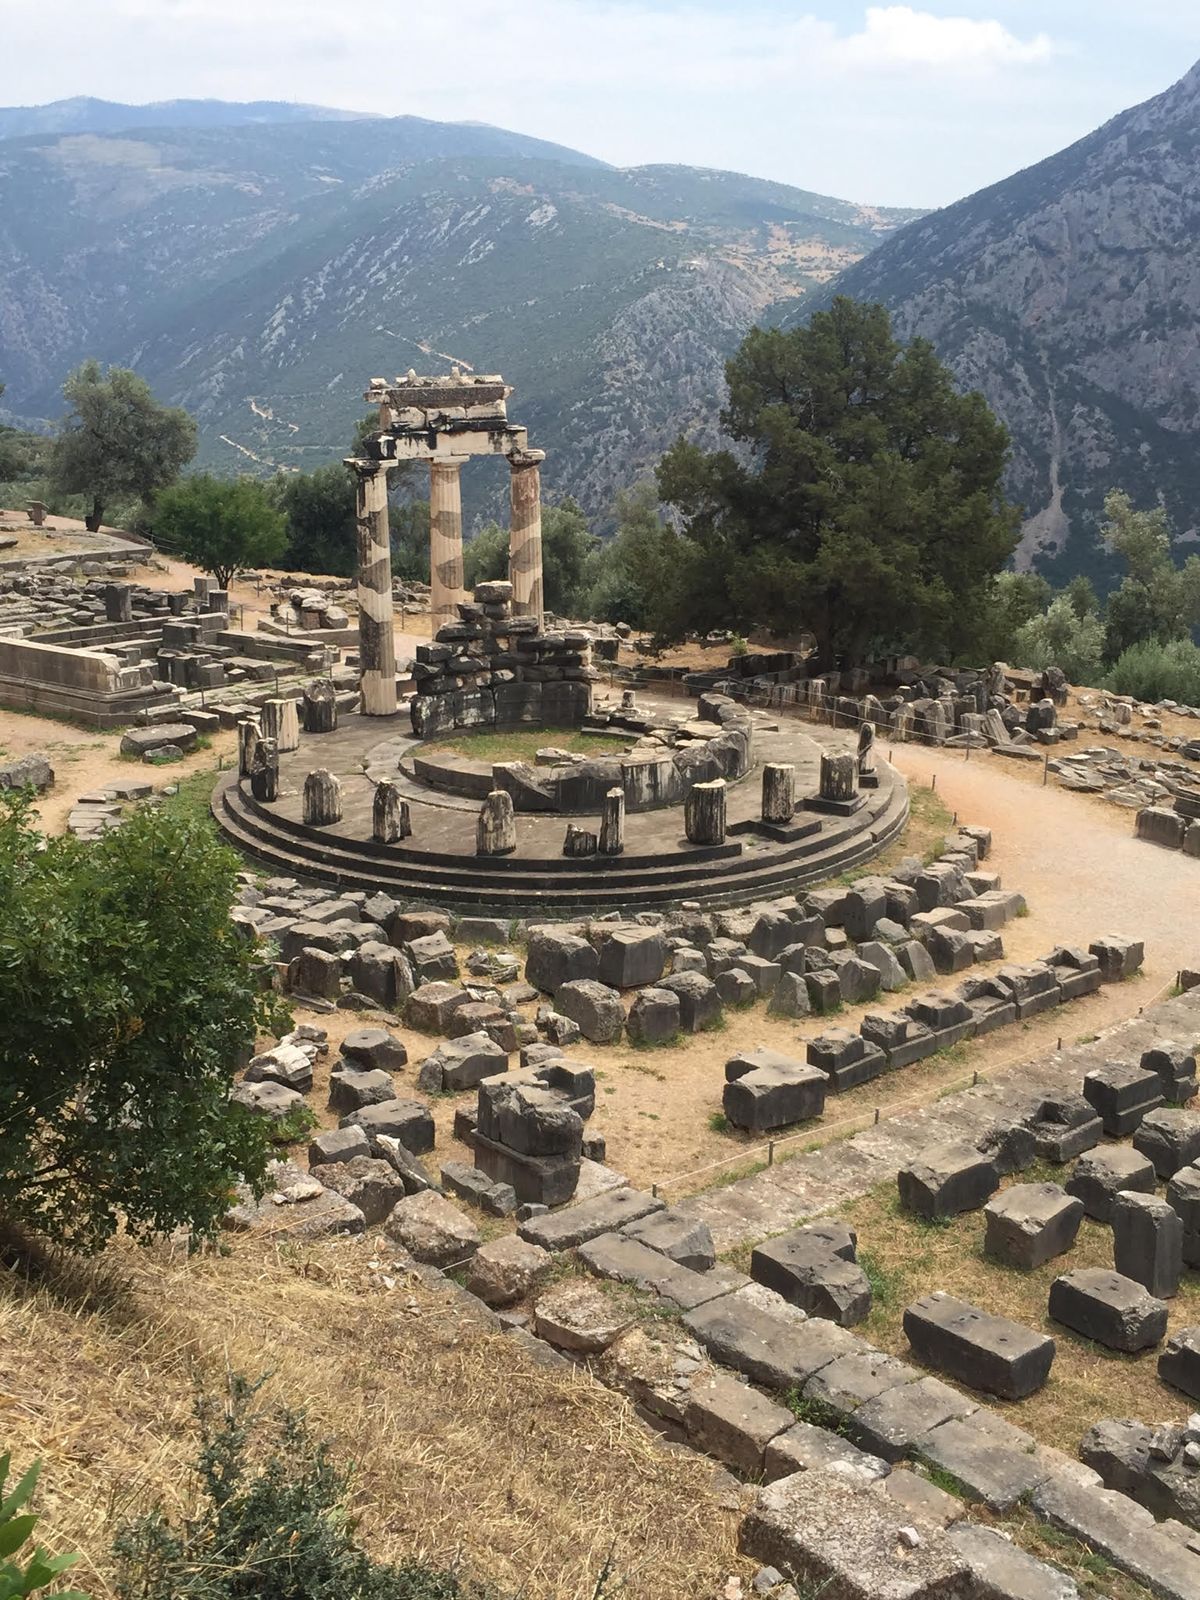 Greece Day 6: The Oracle at Delphi